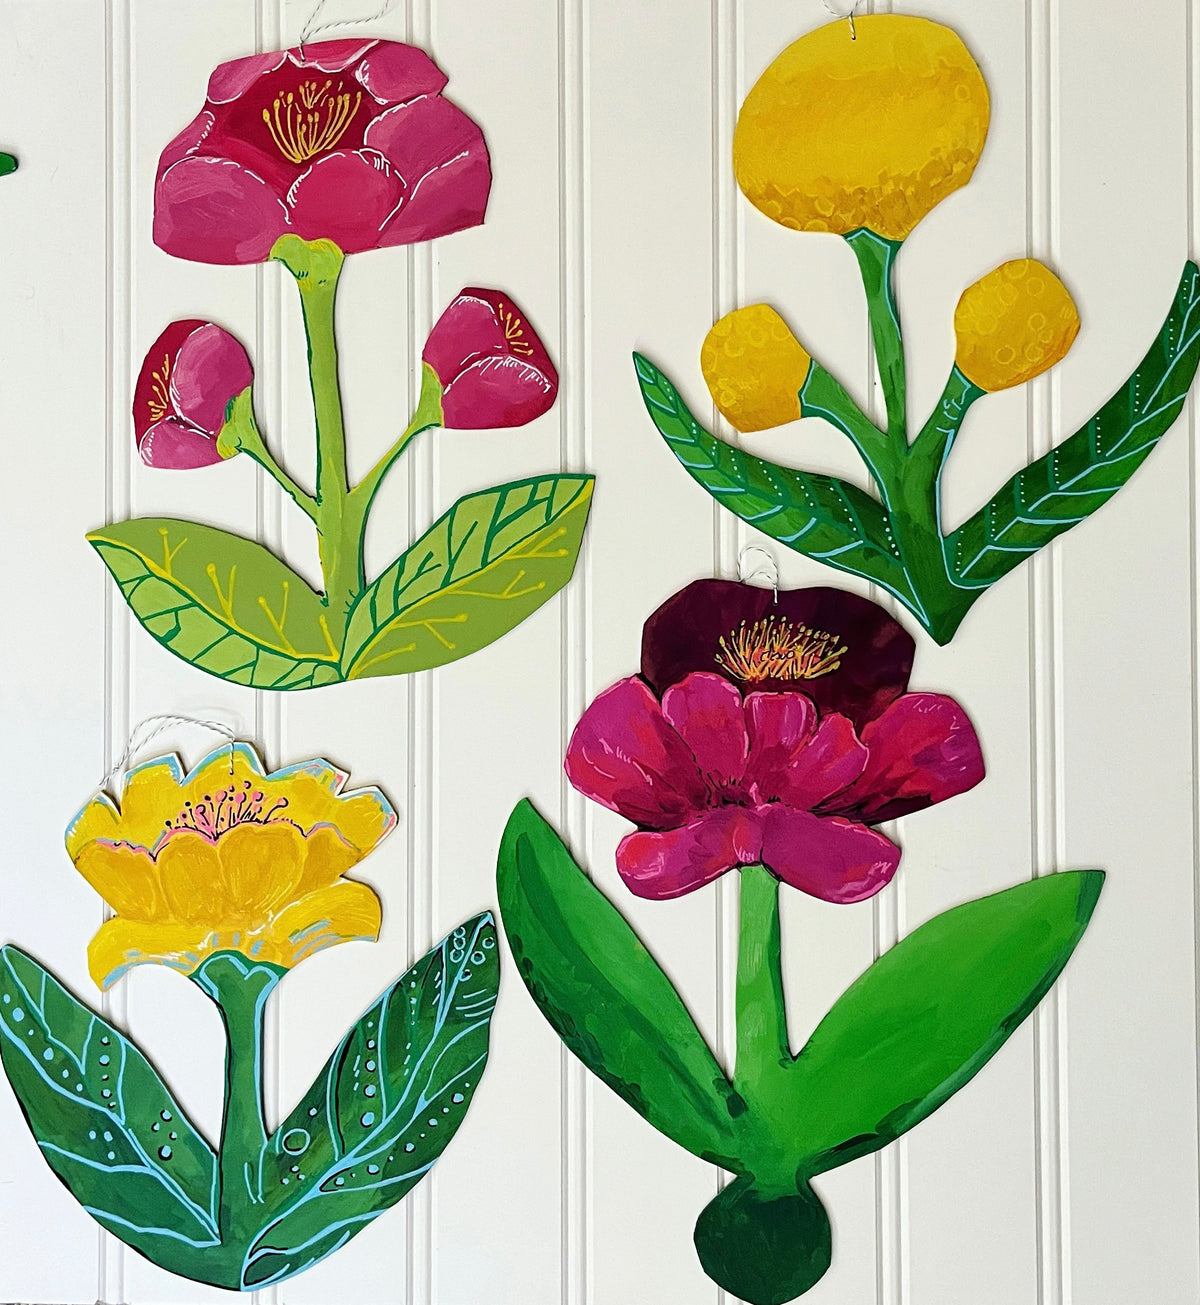 cutout wooden flower painting, by artist Abigail Gray Swartz. group of flowers, acrylic on panel.